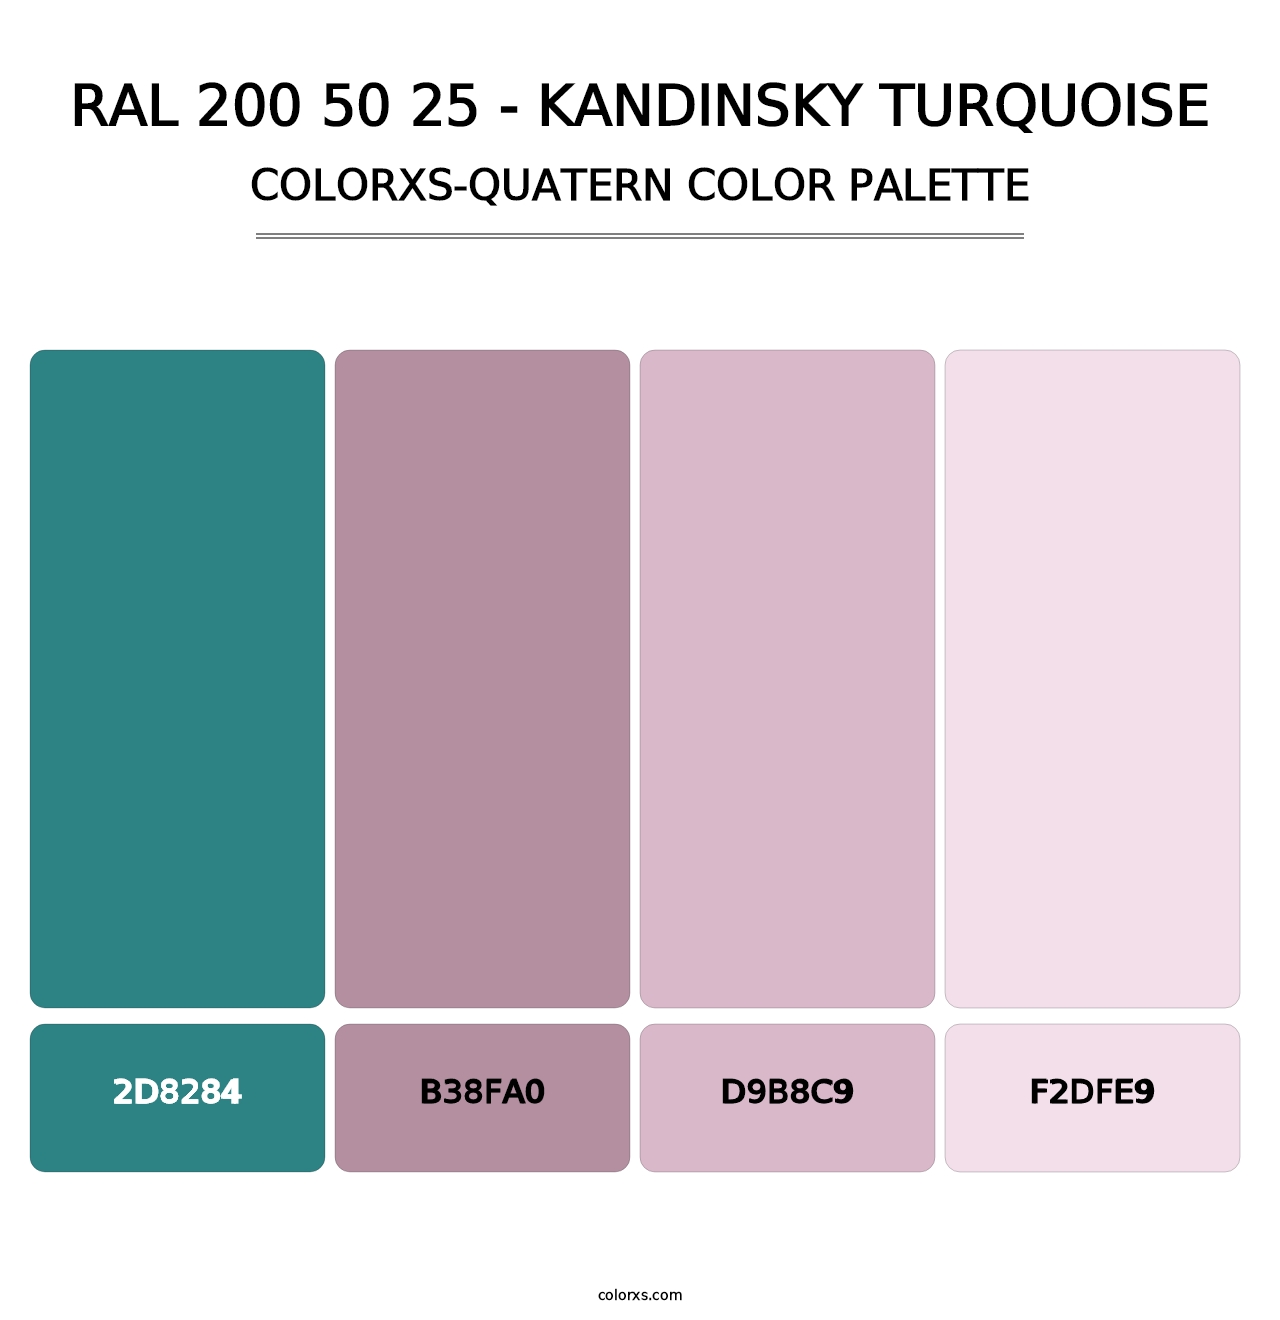 RAL 200 50 25 - Kandinsky Turquoise - Colorxs Quatern Palette